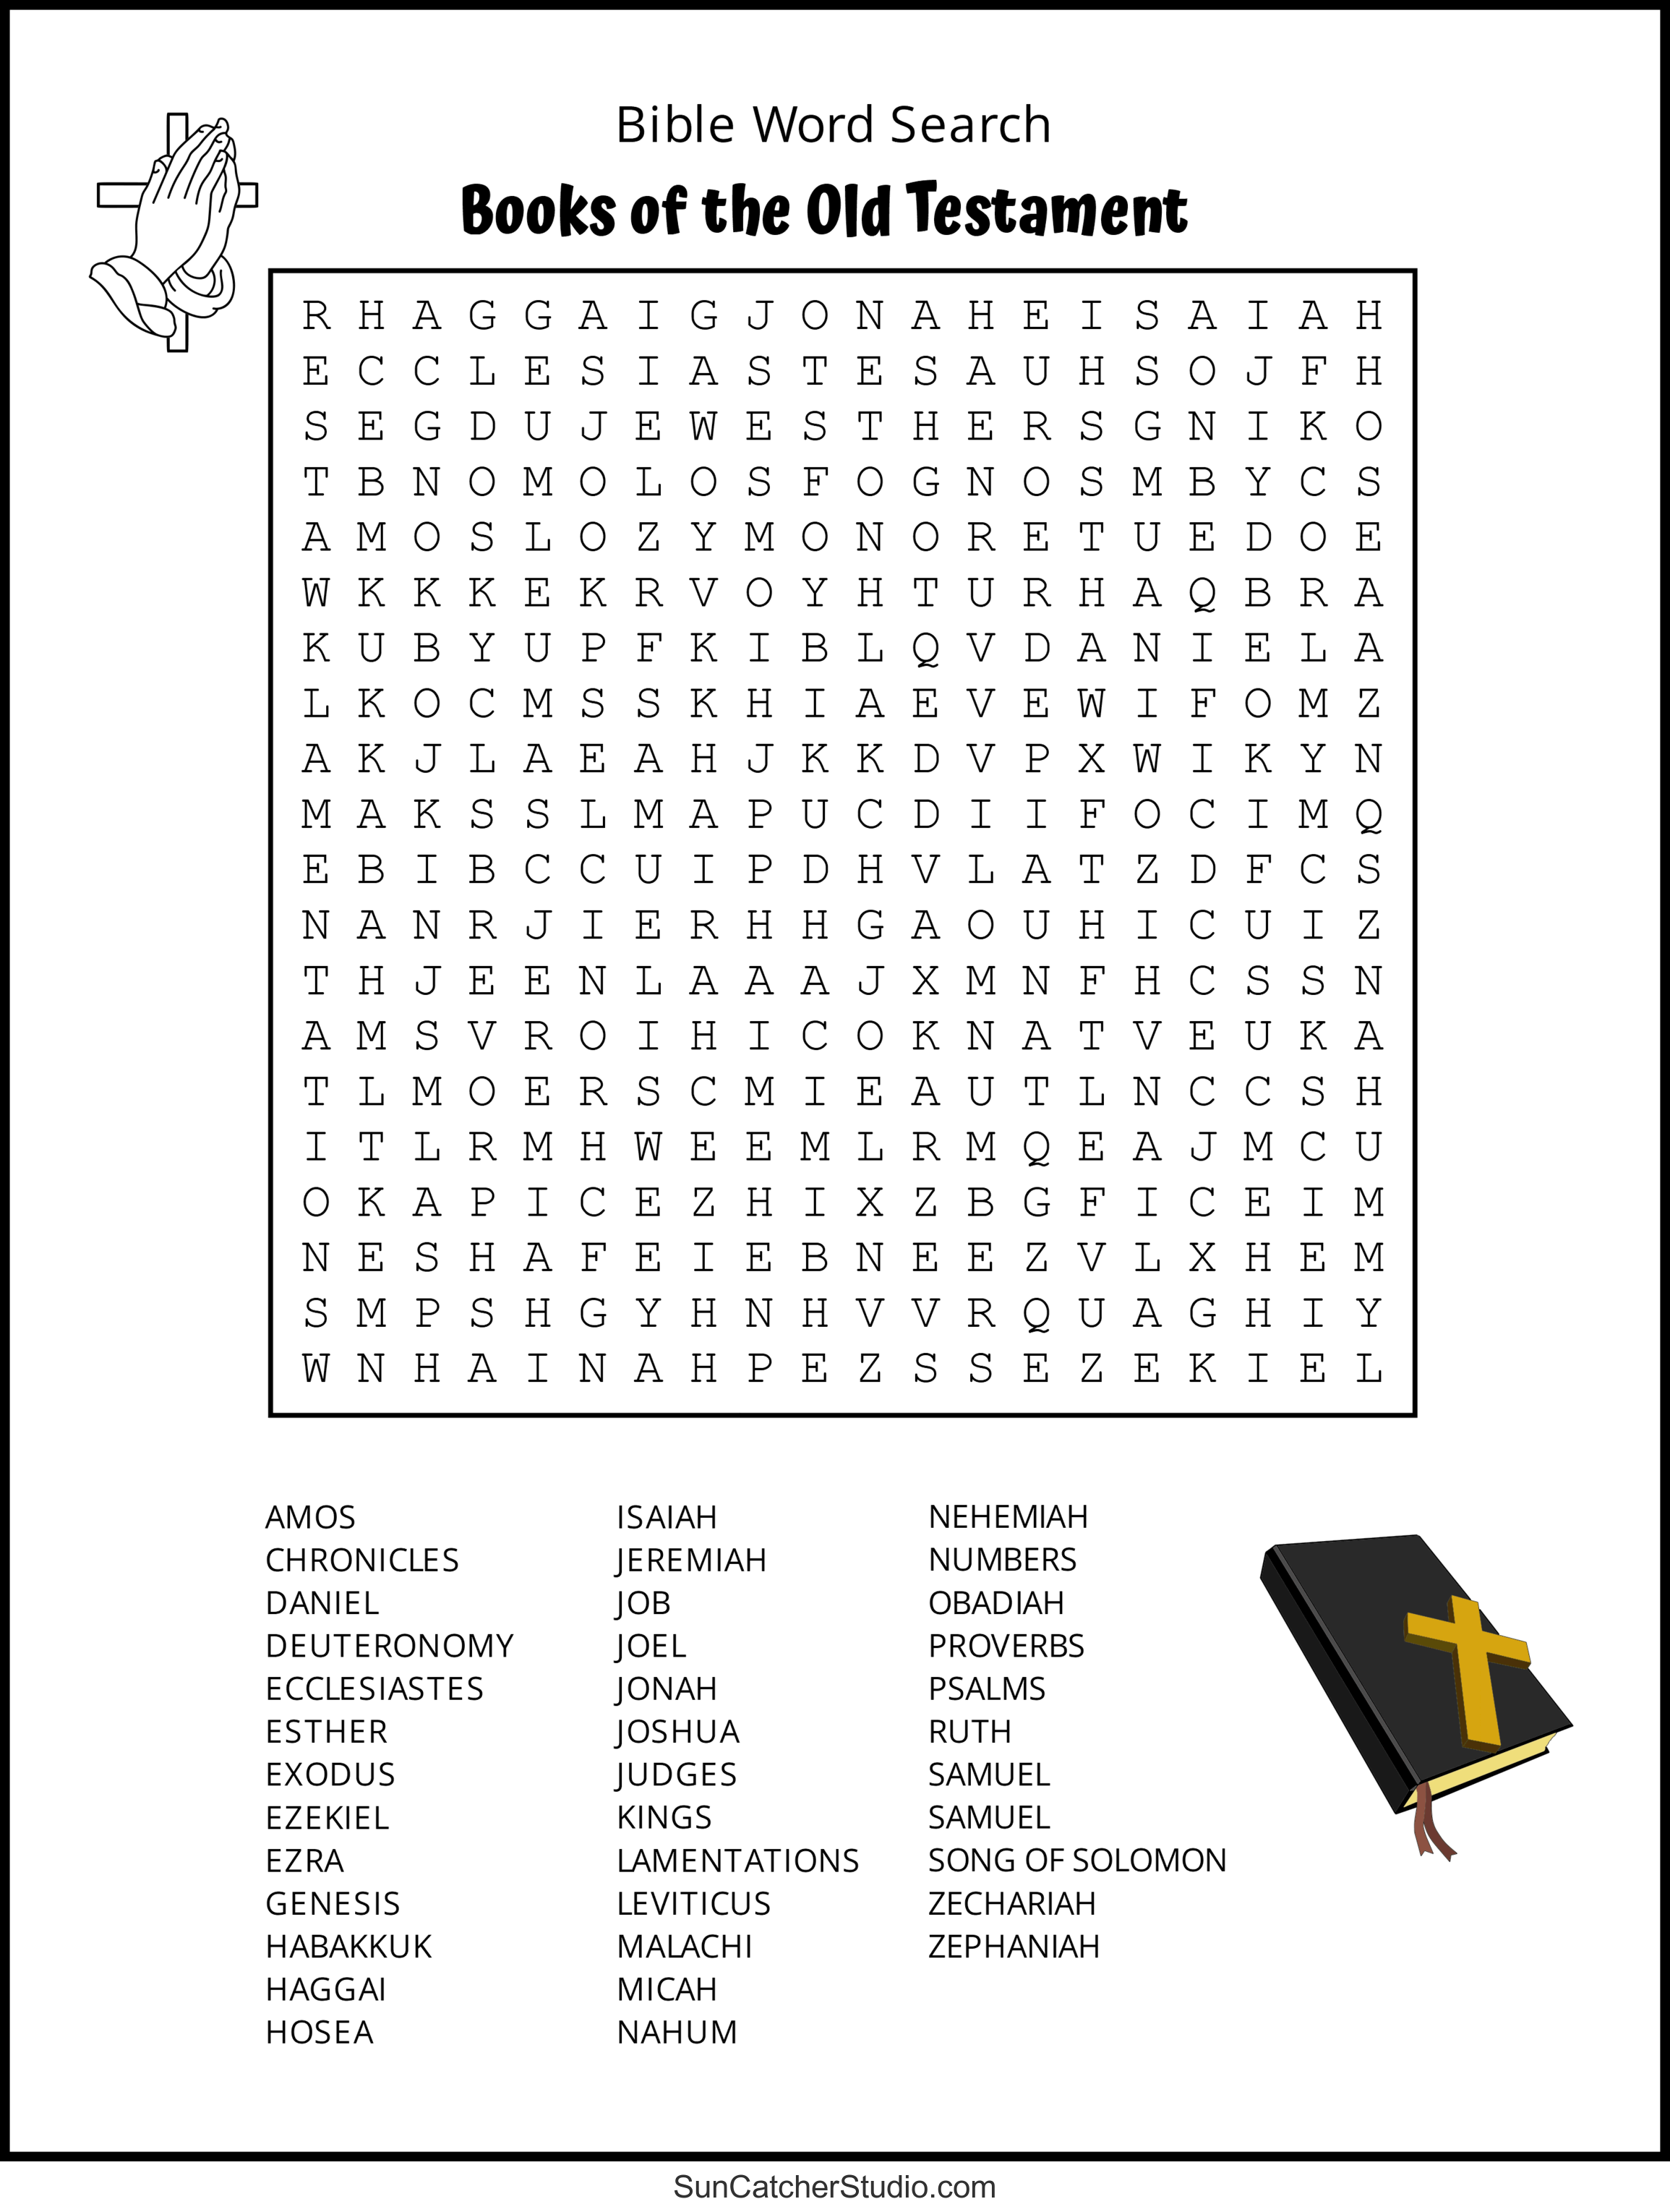 bible-word-search-free-printable-christian-puzzles-diy-projects